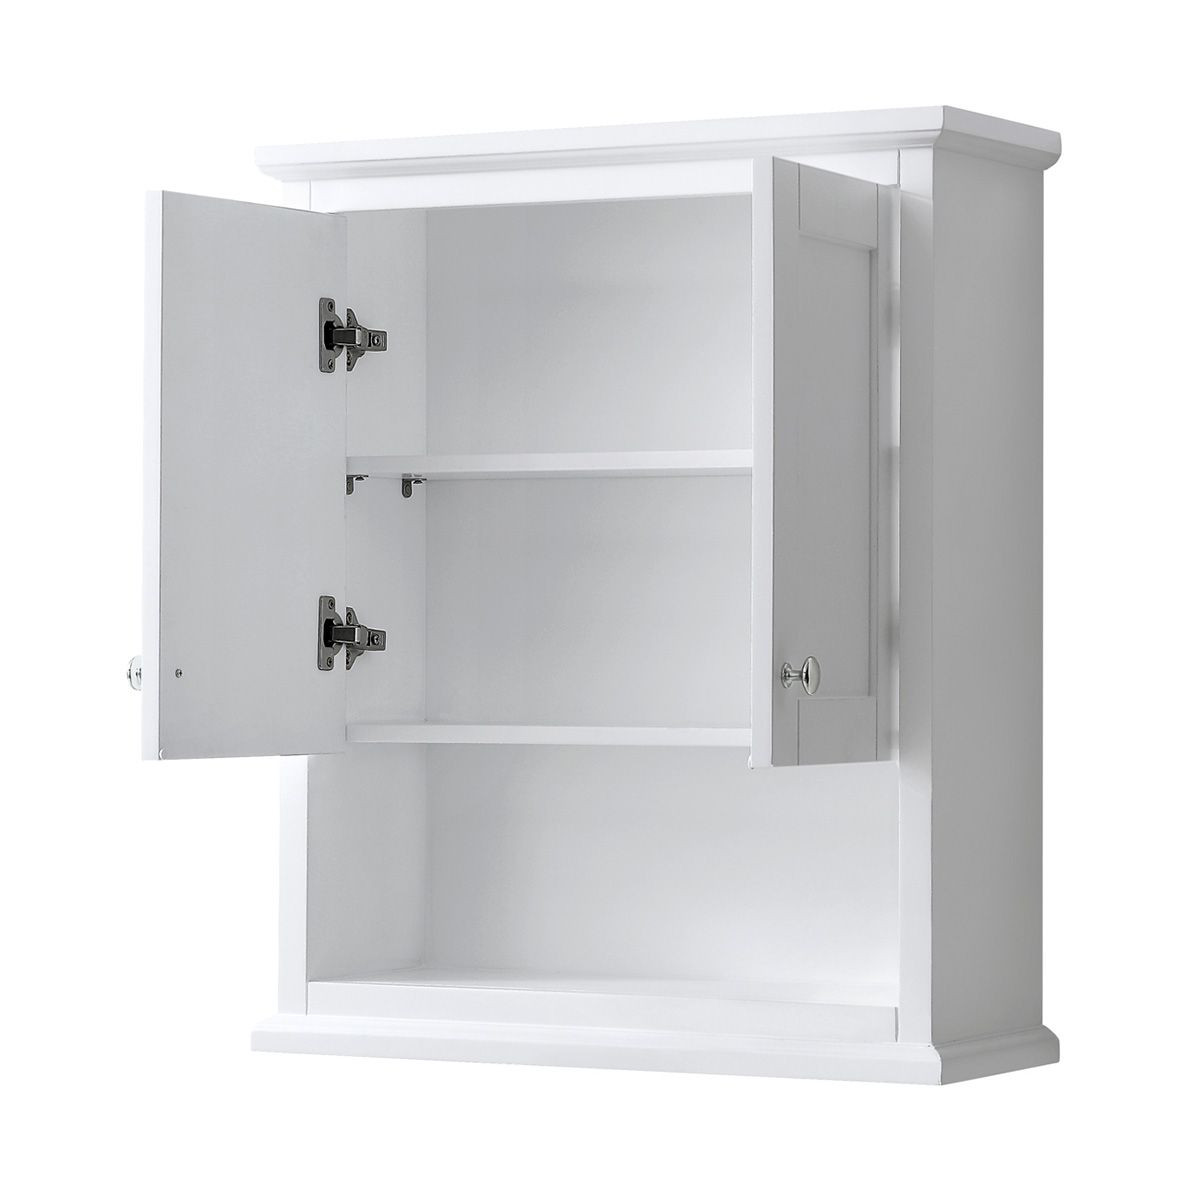 Wall Mounted Bathroom Storage
 Wall Mounted Bathroom Storage Cabinet in White